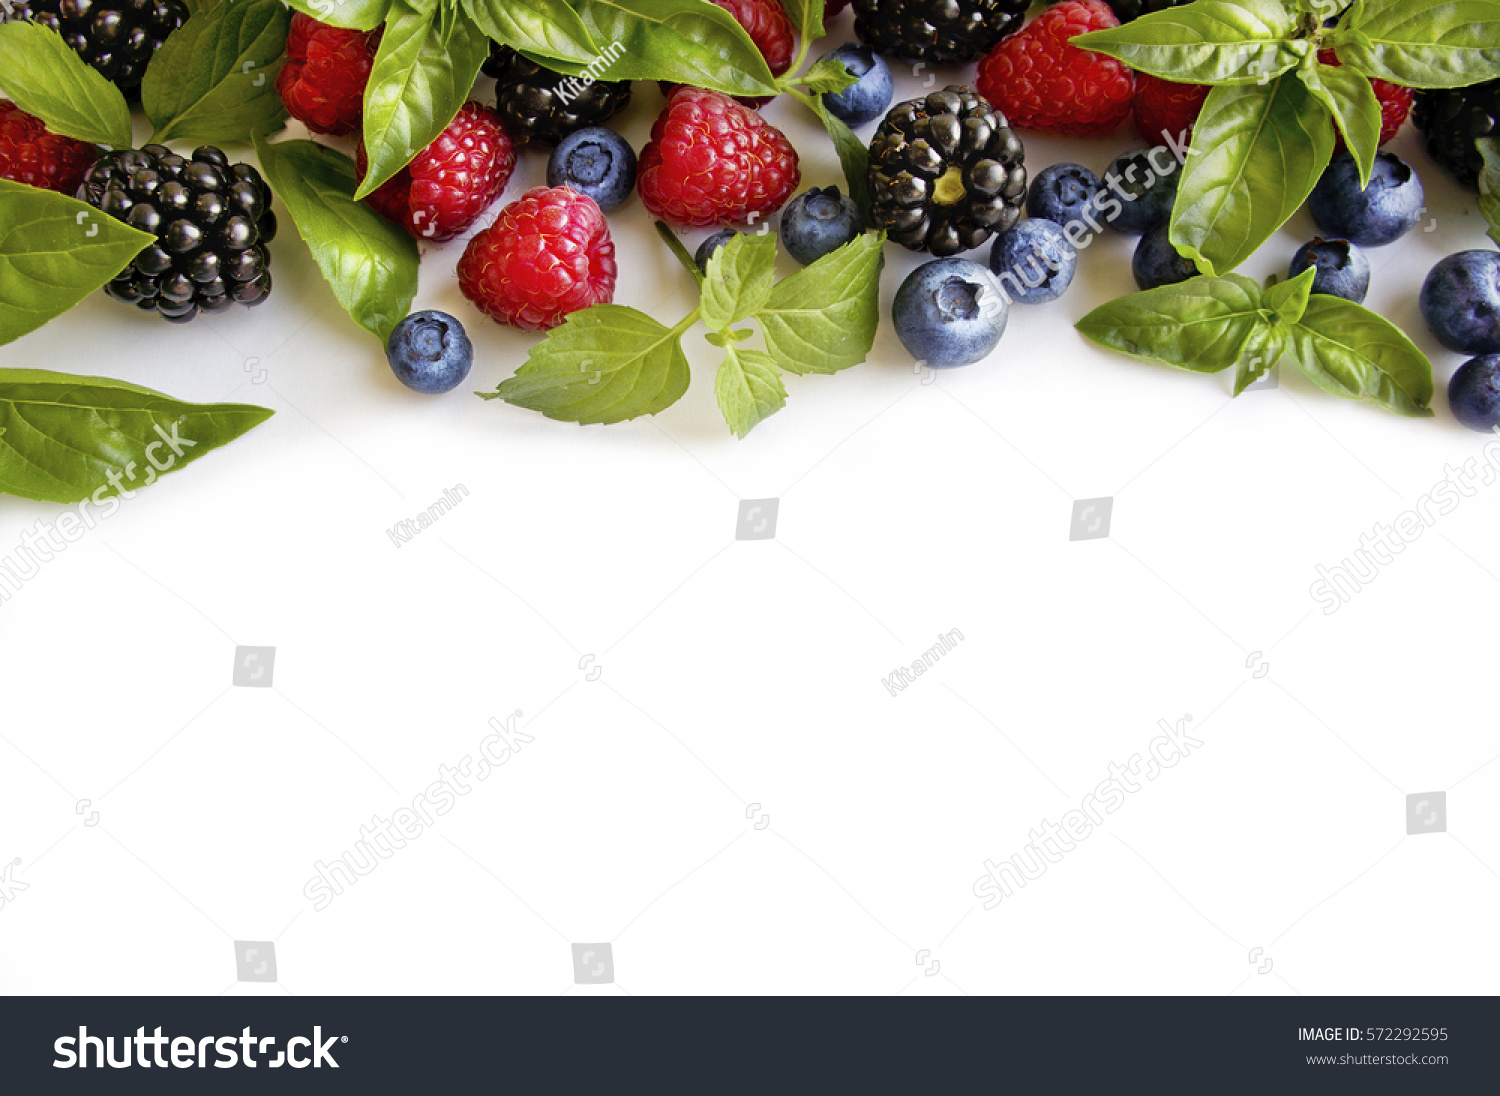 Various fresh summer berries on white background. Ripe raspberries, blackberries, blueberries, mint and basil leaves. Berries at border of image with copy space for text. Background berries. #572292595